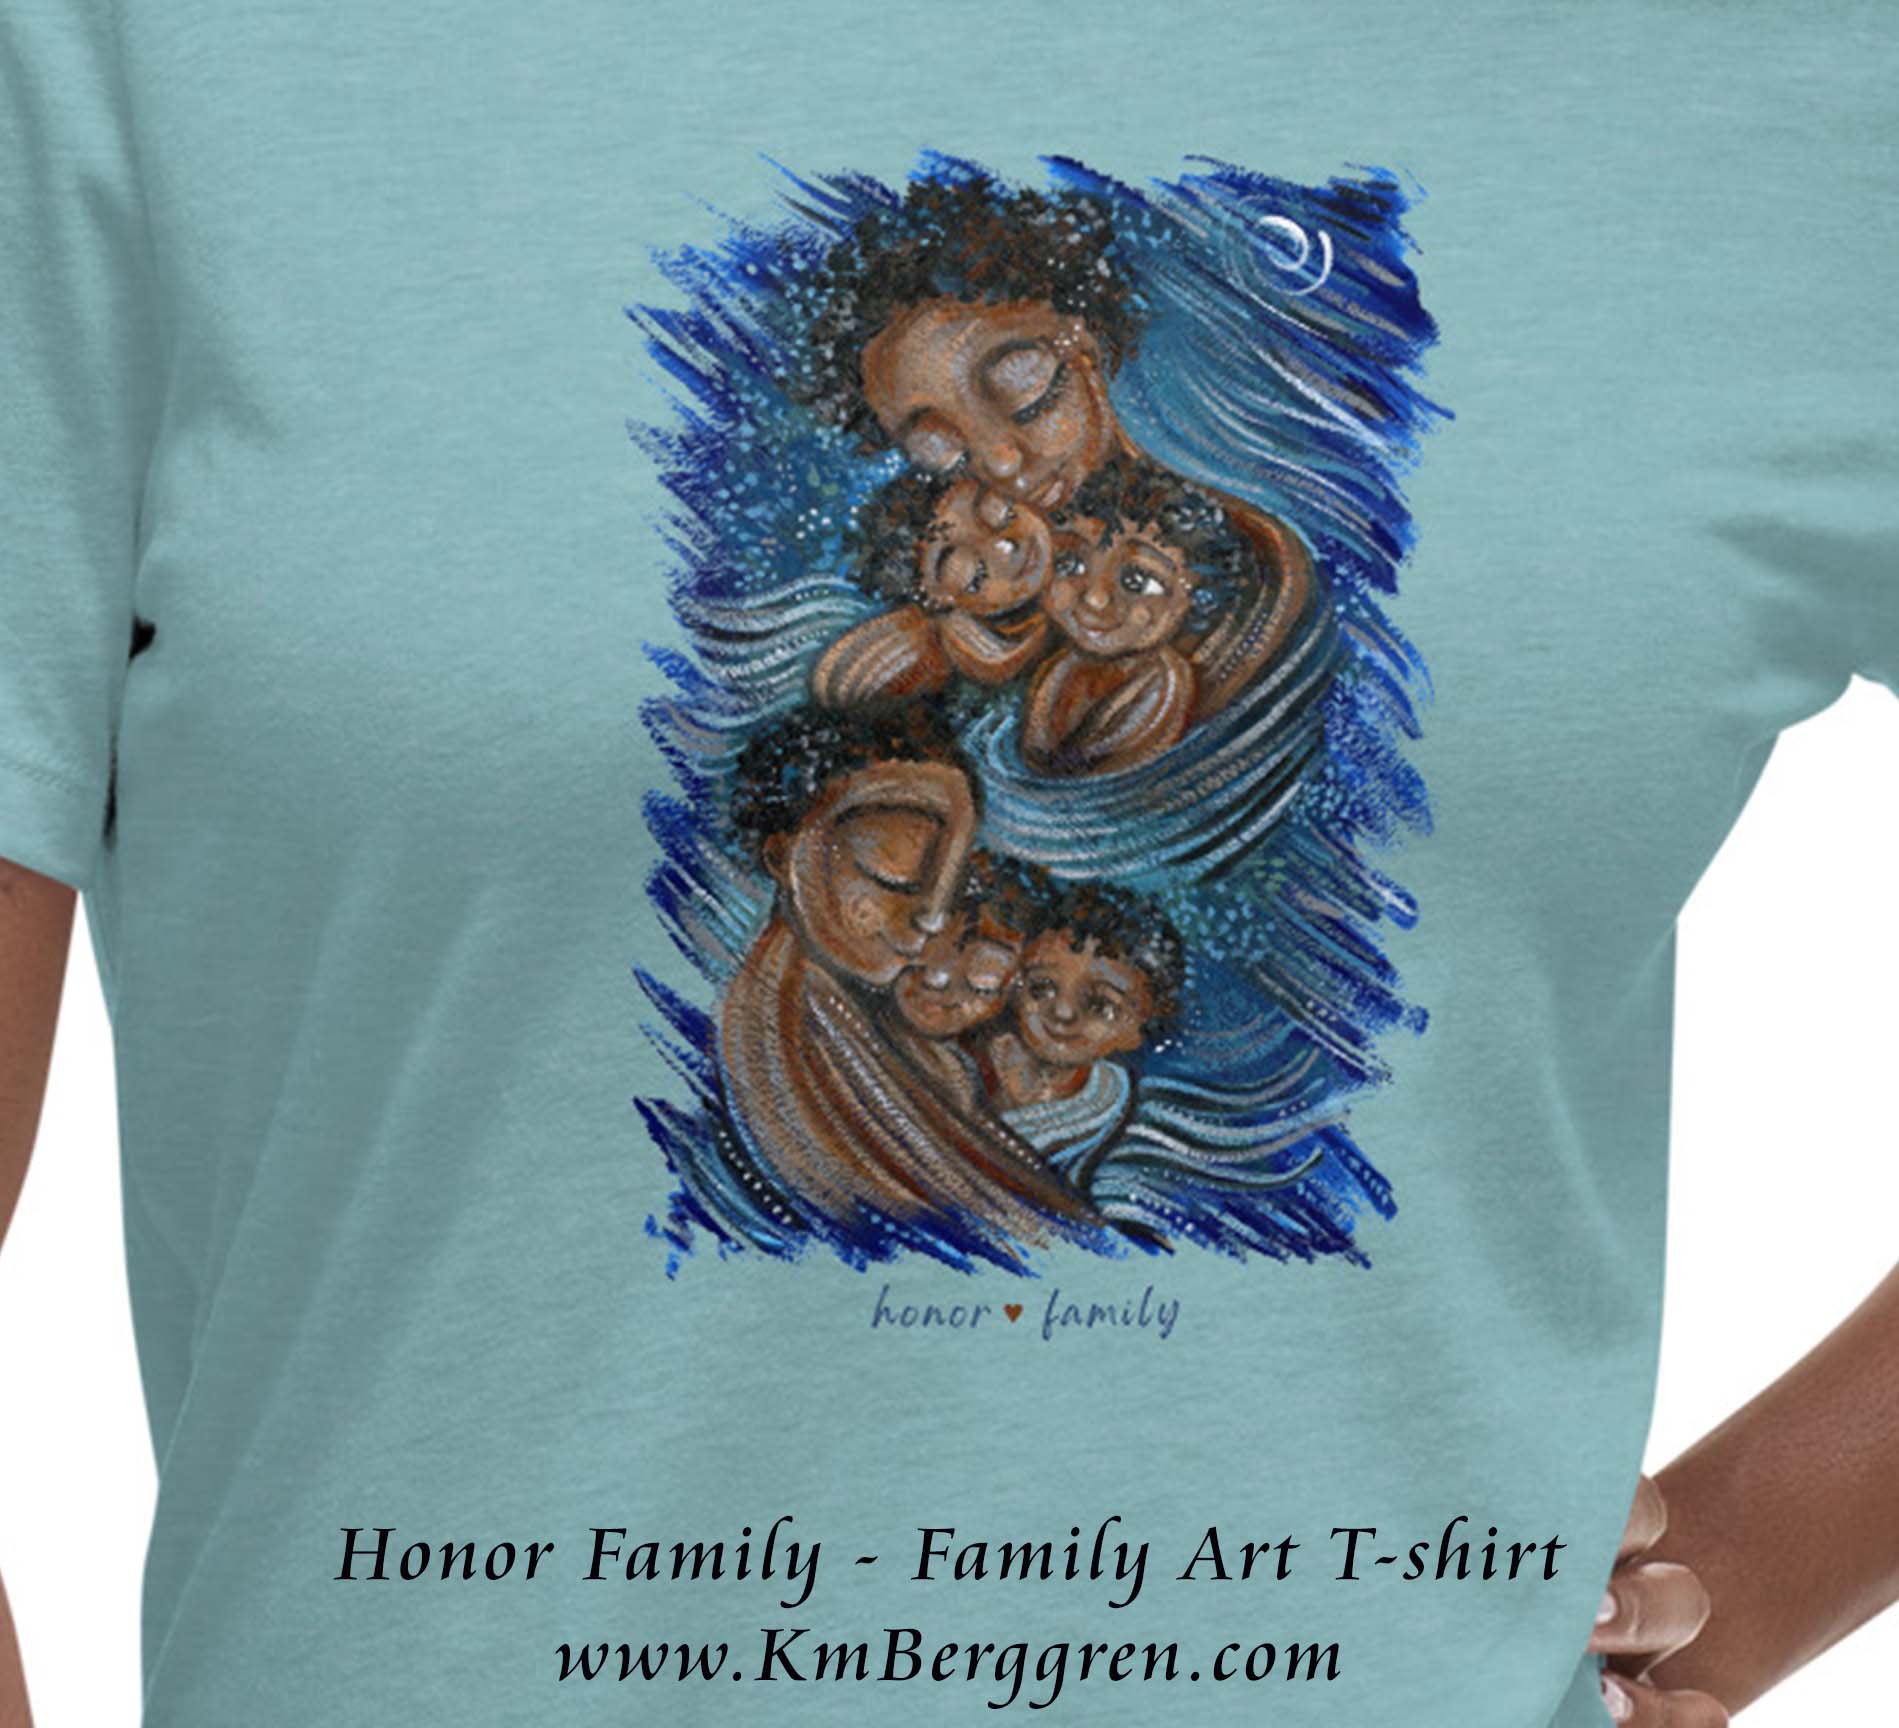 mother and child t-shirt, mom baby shirt, graphic tee motherhood, mother and kids graphic tee, mother child teeshirt, mama baby tee, baby mama t-shirt, tshirt motherhood, gift shirt for mom, wearable art for mom, new baby gift, new mom shirt, new mom gift, kmberggren art on shirts, art clothing, family of color shirt, women of color art, black family on tshirt, painting of black family, 